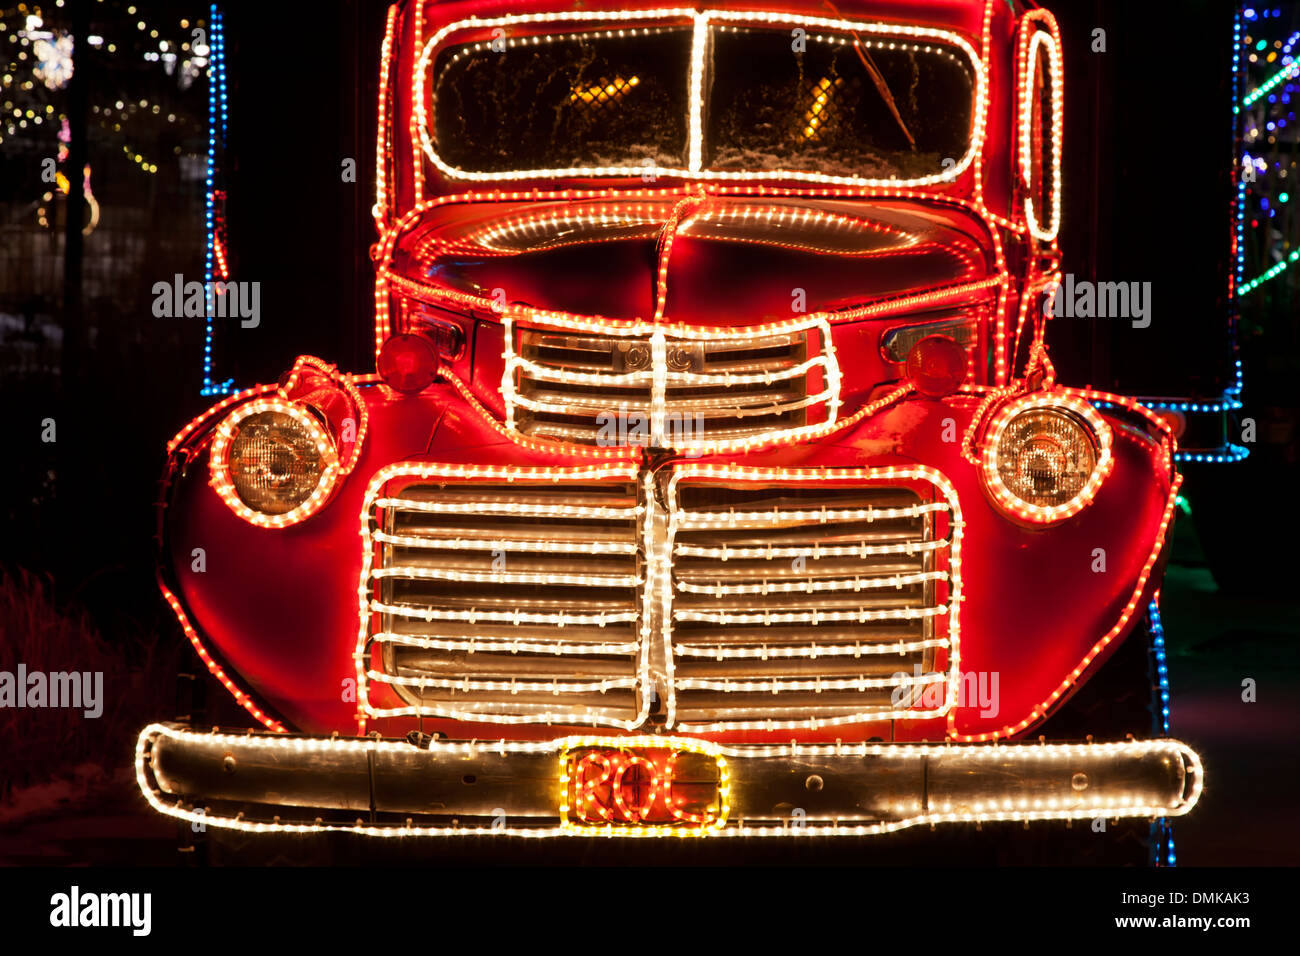 Truck decorated with Christmas lights, River of Lights, Albuquerque Biological Park, Albuquerque, New Mexico USA Stock Photo